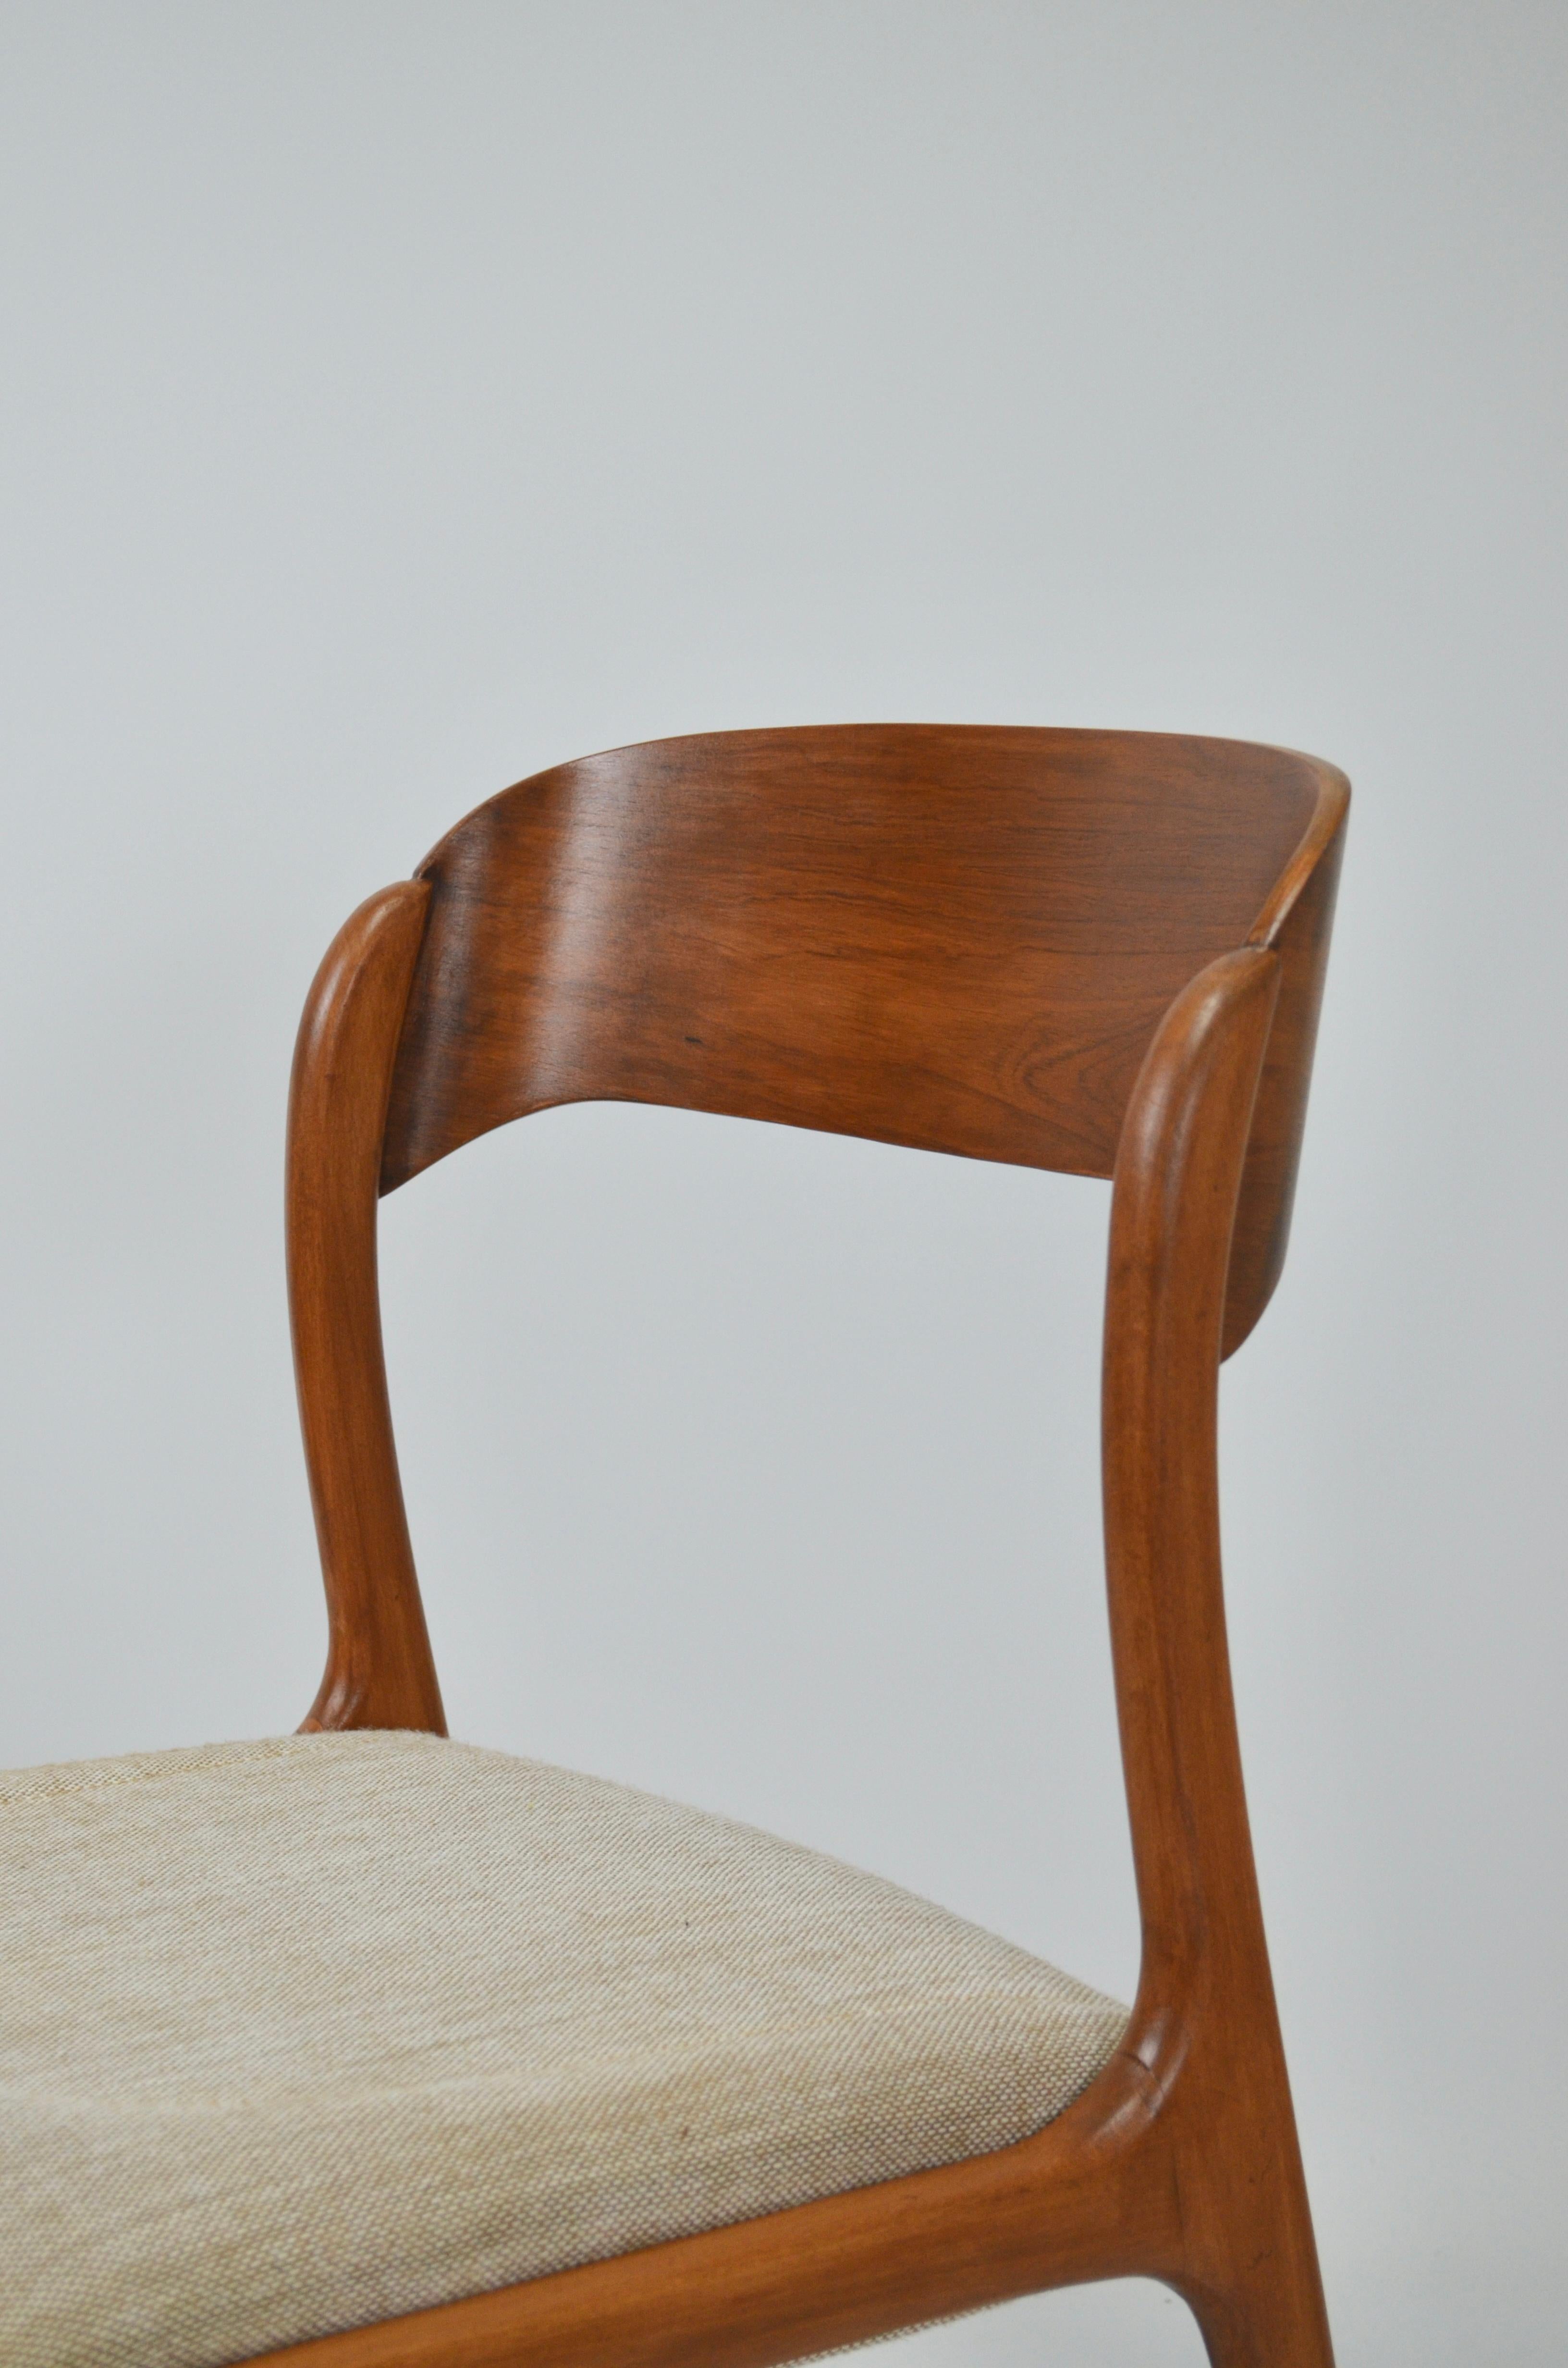 Mid-Century Modern Vintage French Traineau or Sleigh Dining Chairs, Baumann, France, 60s For Sale